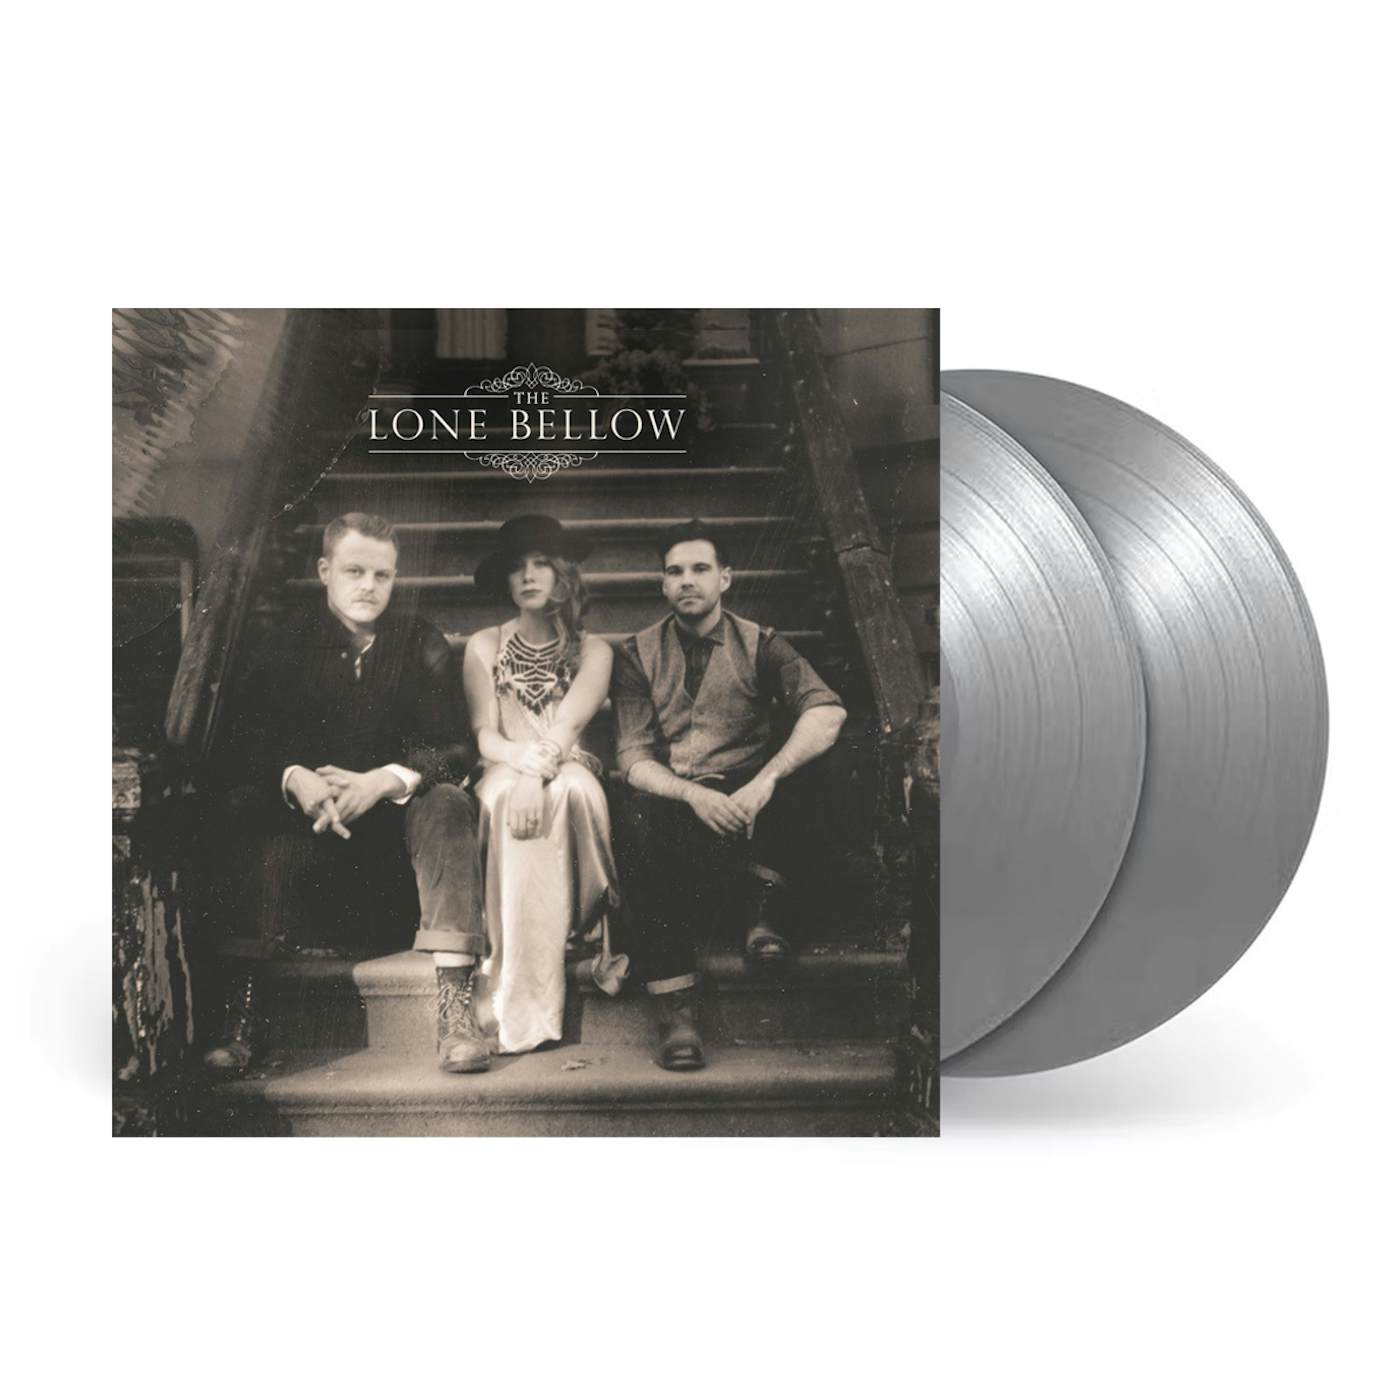 "The Lone Bellow" Special 10 Year Anniversary Metallic Silver Double LP Vinyl